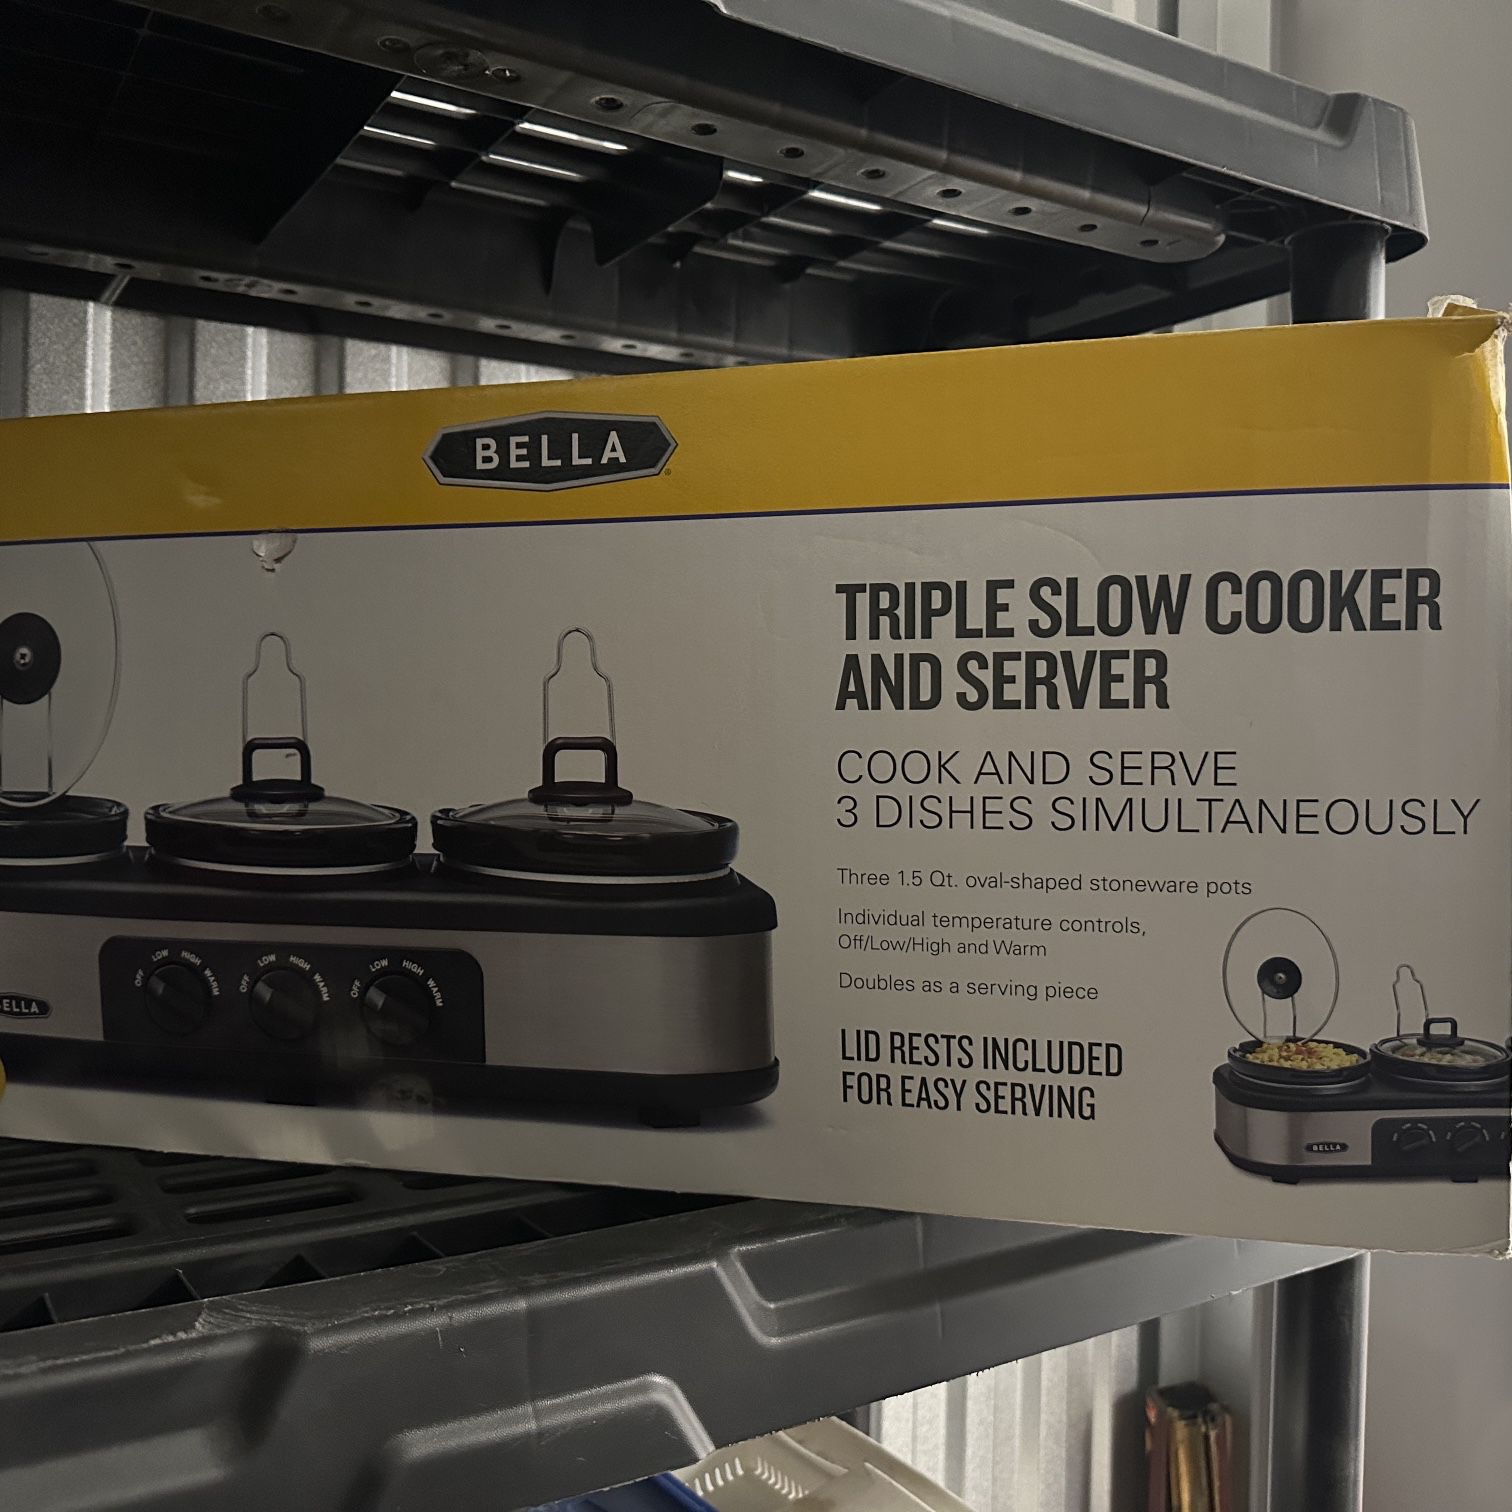 BELLA Triple Slow Cooker and Server 